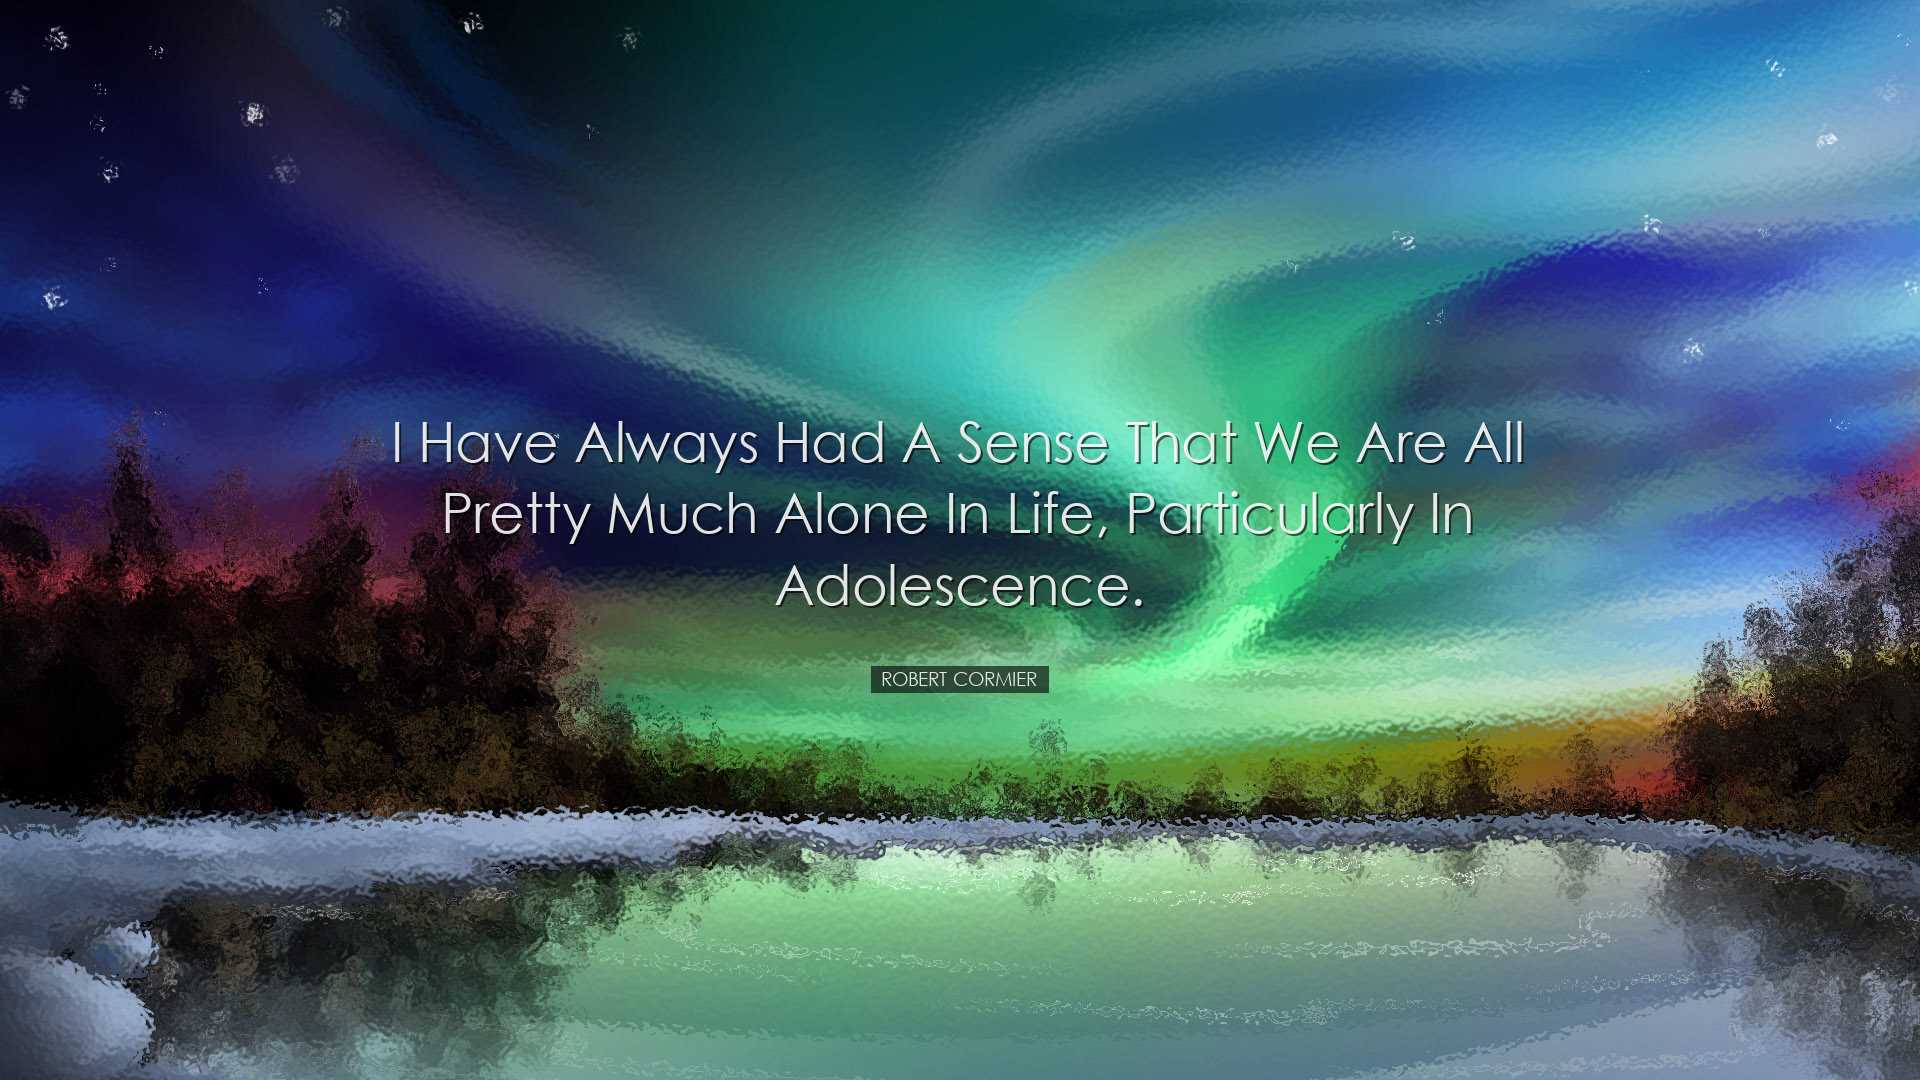 I have always had a sense that we are all pretty much alone in lif